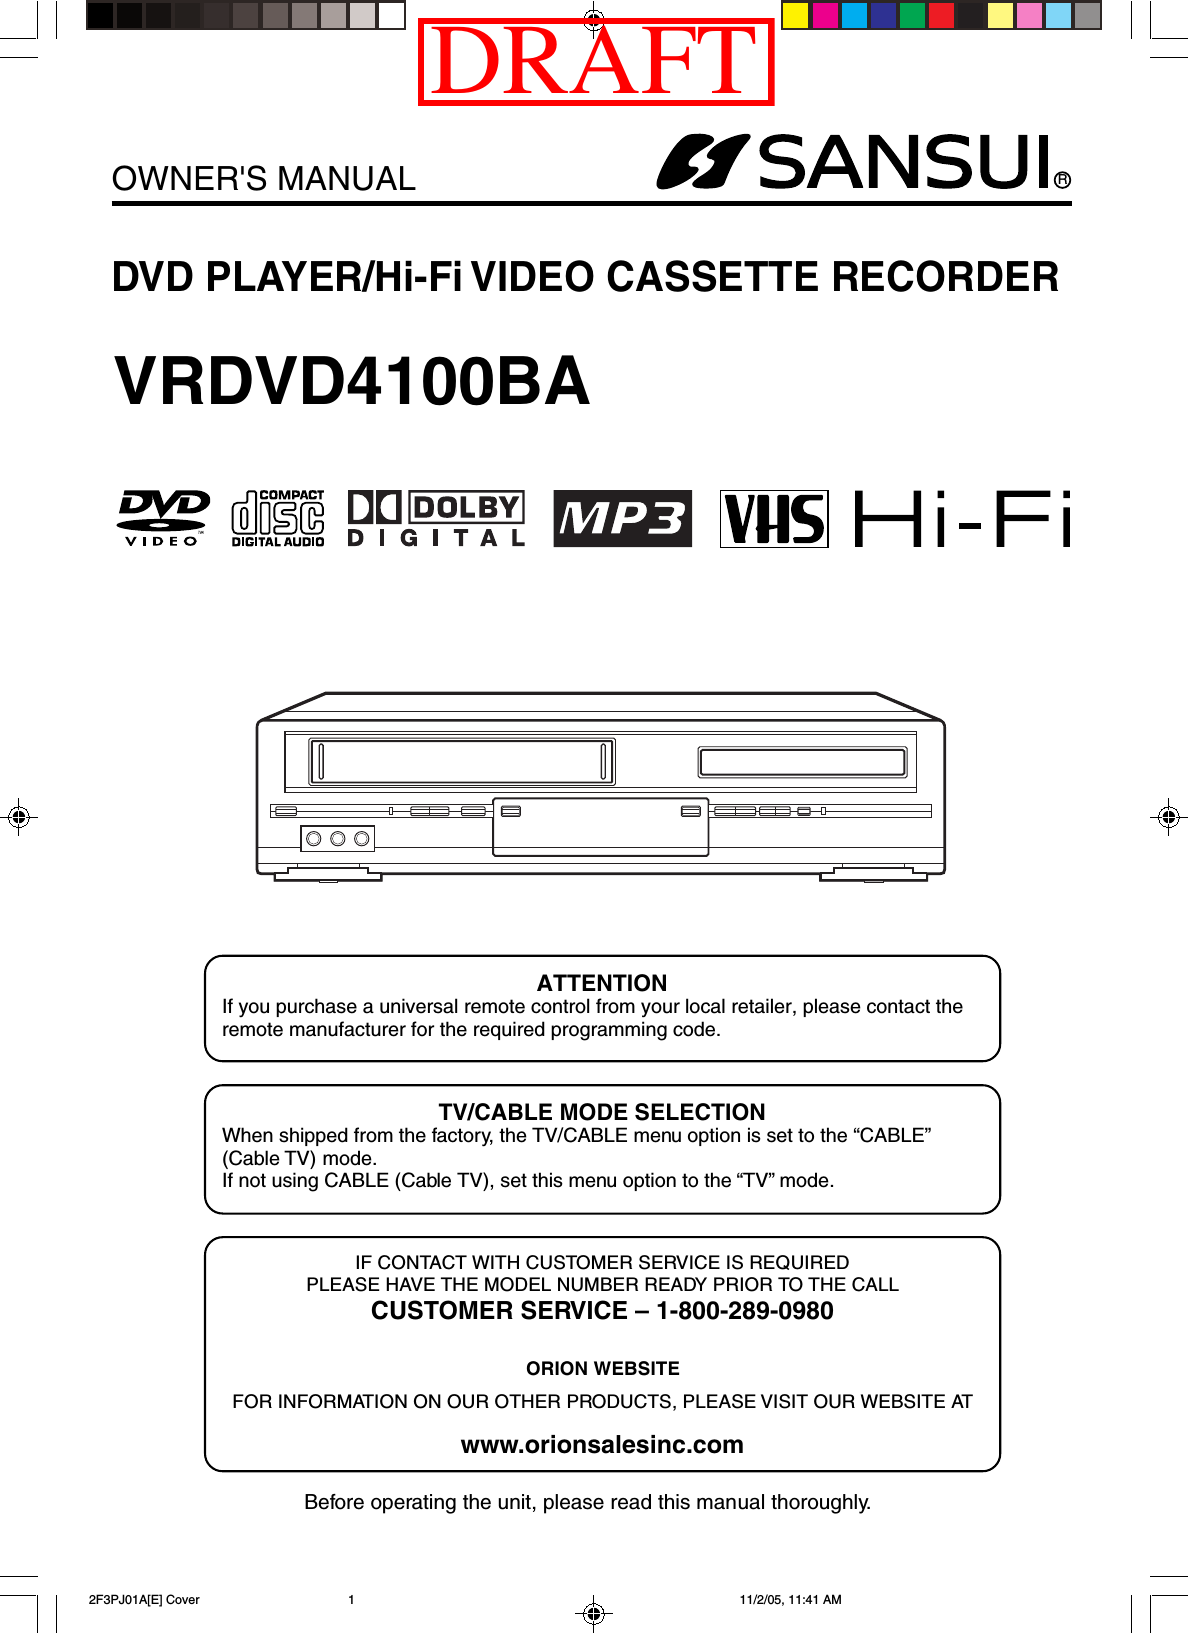 RDVD PLAYER/Hi-Fi VIDEO CASSETTE RECORDEROWNER&apos;S MANUALBefore operating the unit, please read this manual thoroughly.ATTENTIONIf you purchase a universal remote control from your local retailer, please contact theremote manufacturer for the required programming code.TV/CABLE MODE SELECTIONWhen shipped from the factory, the TV/CABLE menu option is set to the “CABLE”(Cable TV) mode.If not using CABLE (Cable TV), set this menu option to the “TV” mode.VRDVD4100BAIF CONTACT WITH CUSTOMER SERVICE IS REQUIREDPLEASE HAVE THE MODEL NUMBER READY PRIOR TO THE CALLCUSTOMER SERVICE – 1-800-289-0980ORION WEBSITEFOR INFORMATION ON OUR OTHER PRODUCTS, PLEASE VISIT OUR WEBSITE ATwww.orionsalesinc.com 2F3PJ01A[E] Cover 11/2/05, 11:41 AM1DRAFT